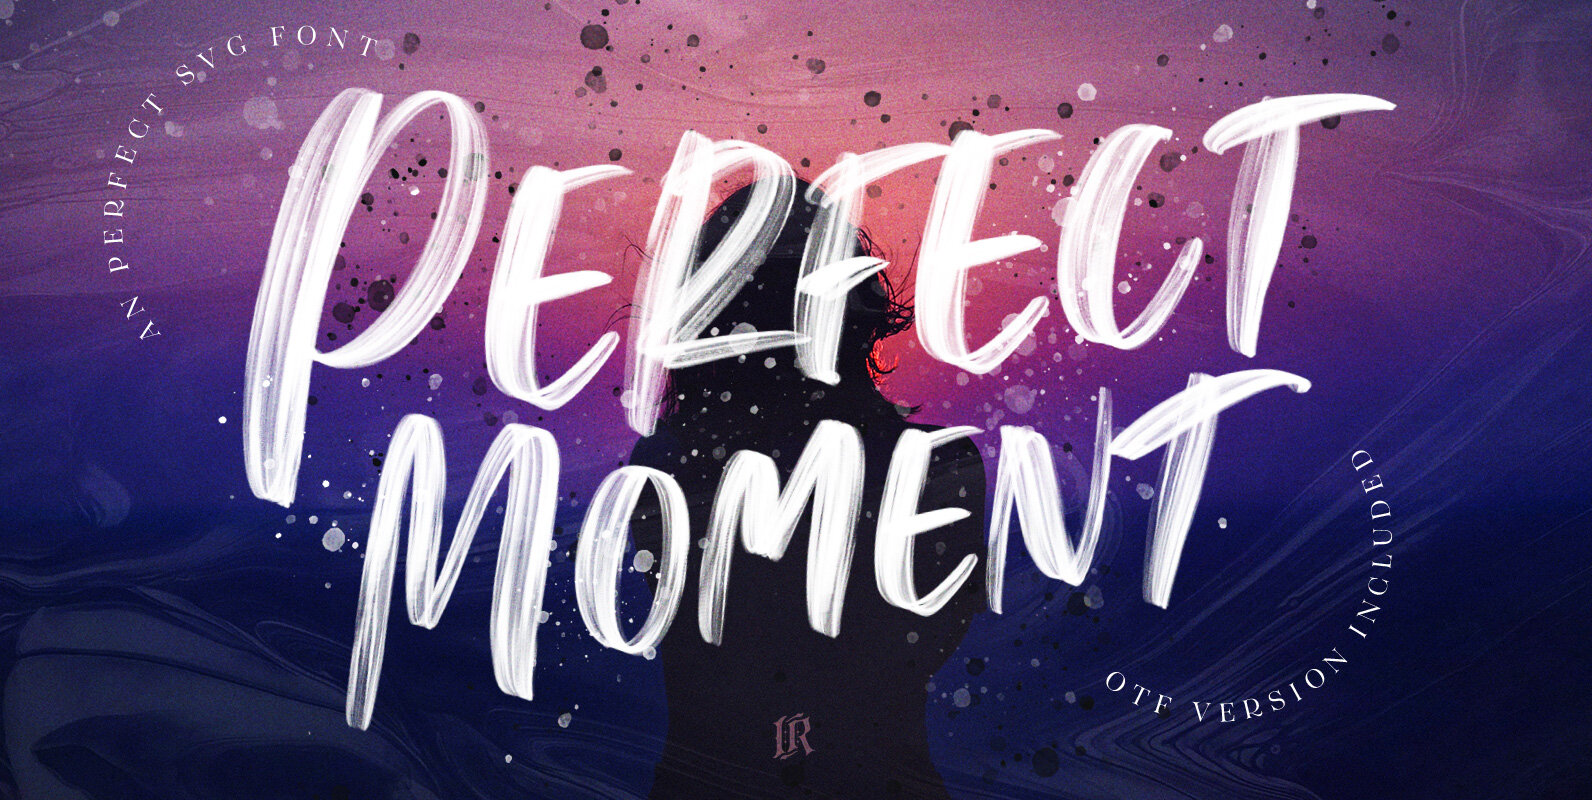 Perfect Moment SVG